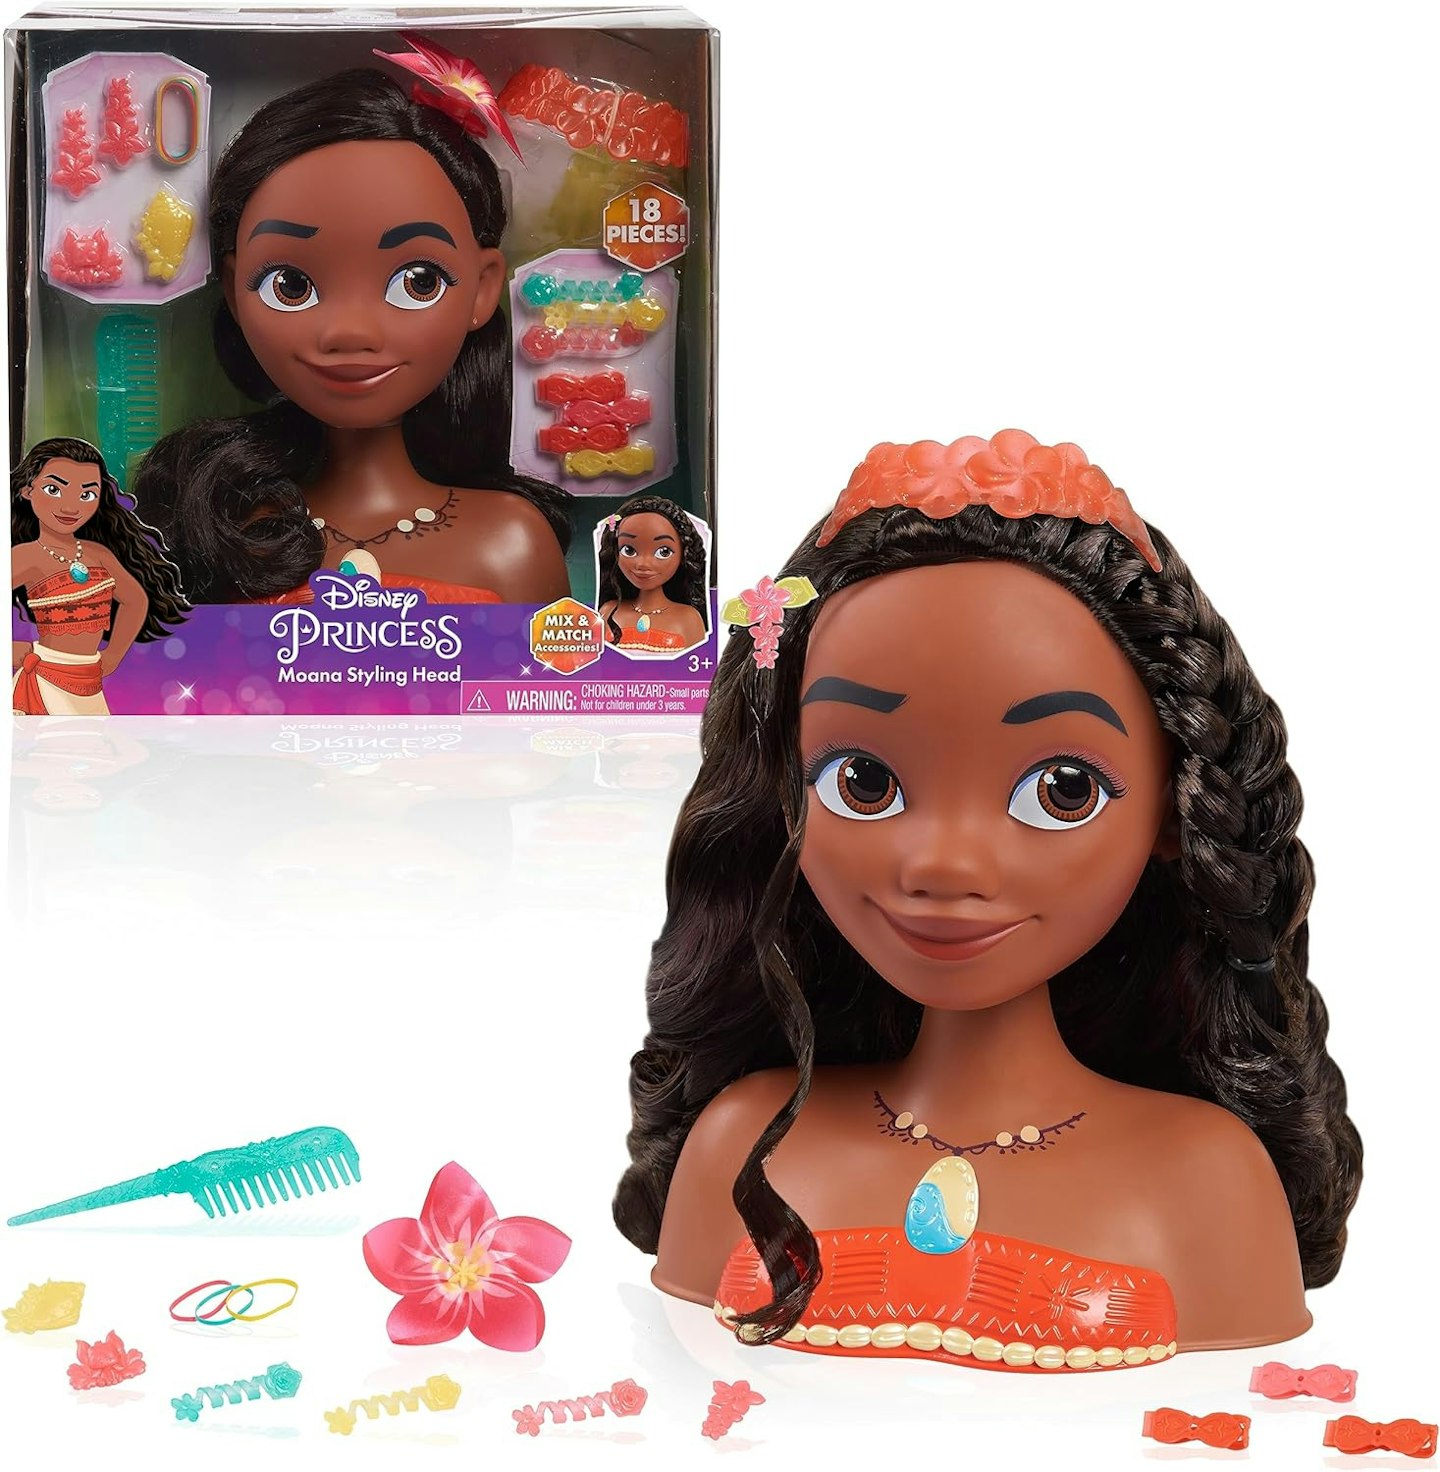 Makeup Doll Set Princess Hair Styling Head Doll Playset With Beauty And  Fashion Accessories For